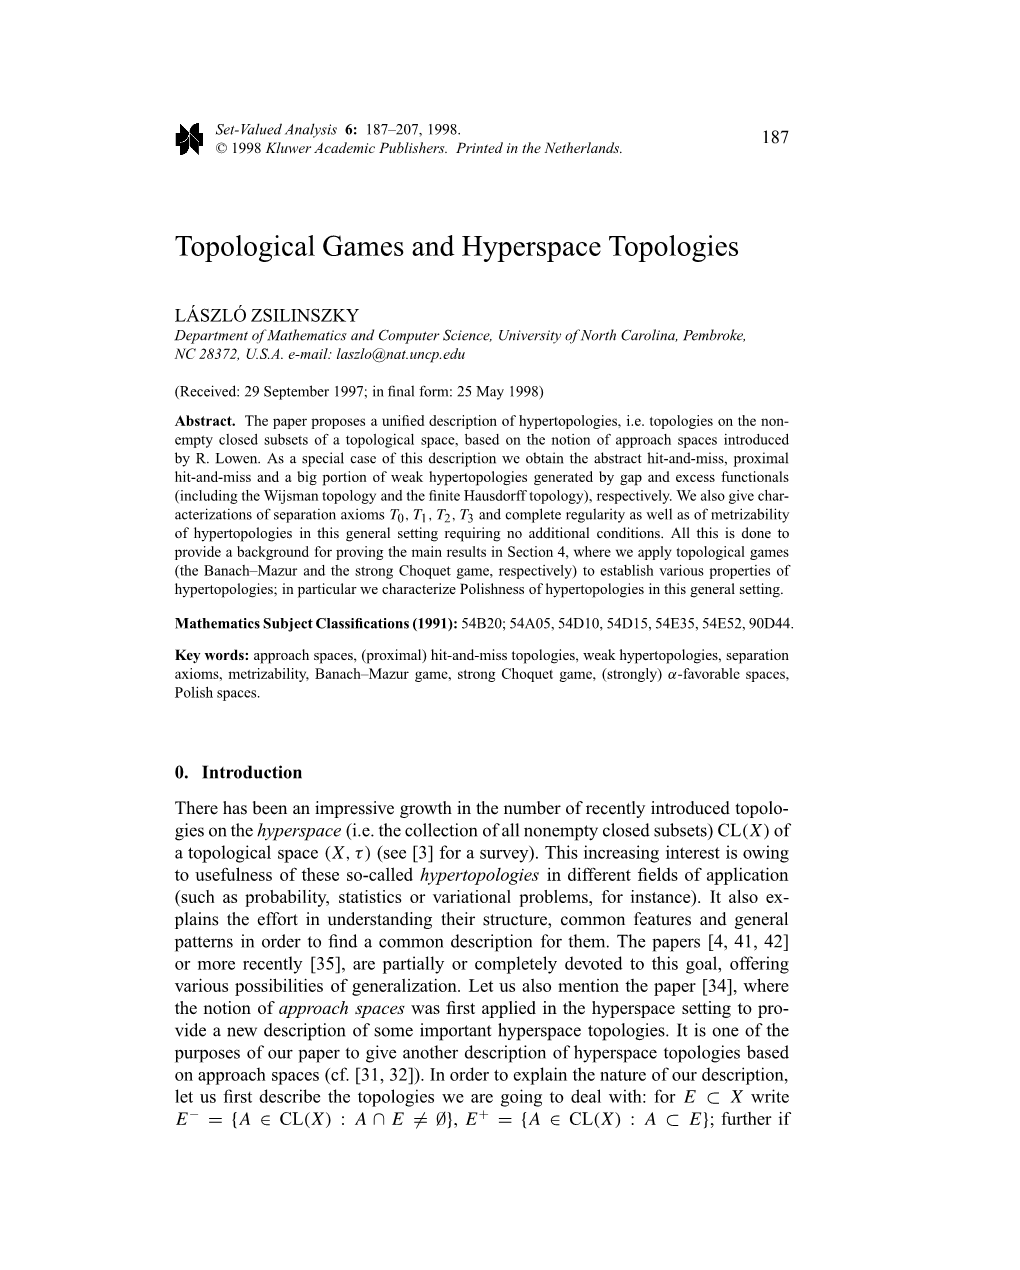 Topological Games and Hyperspace Topologies